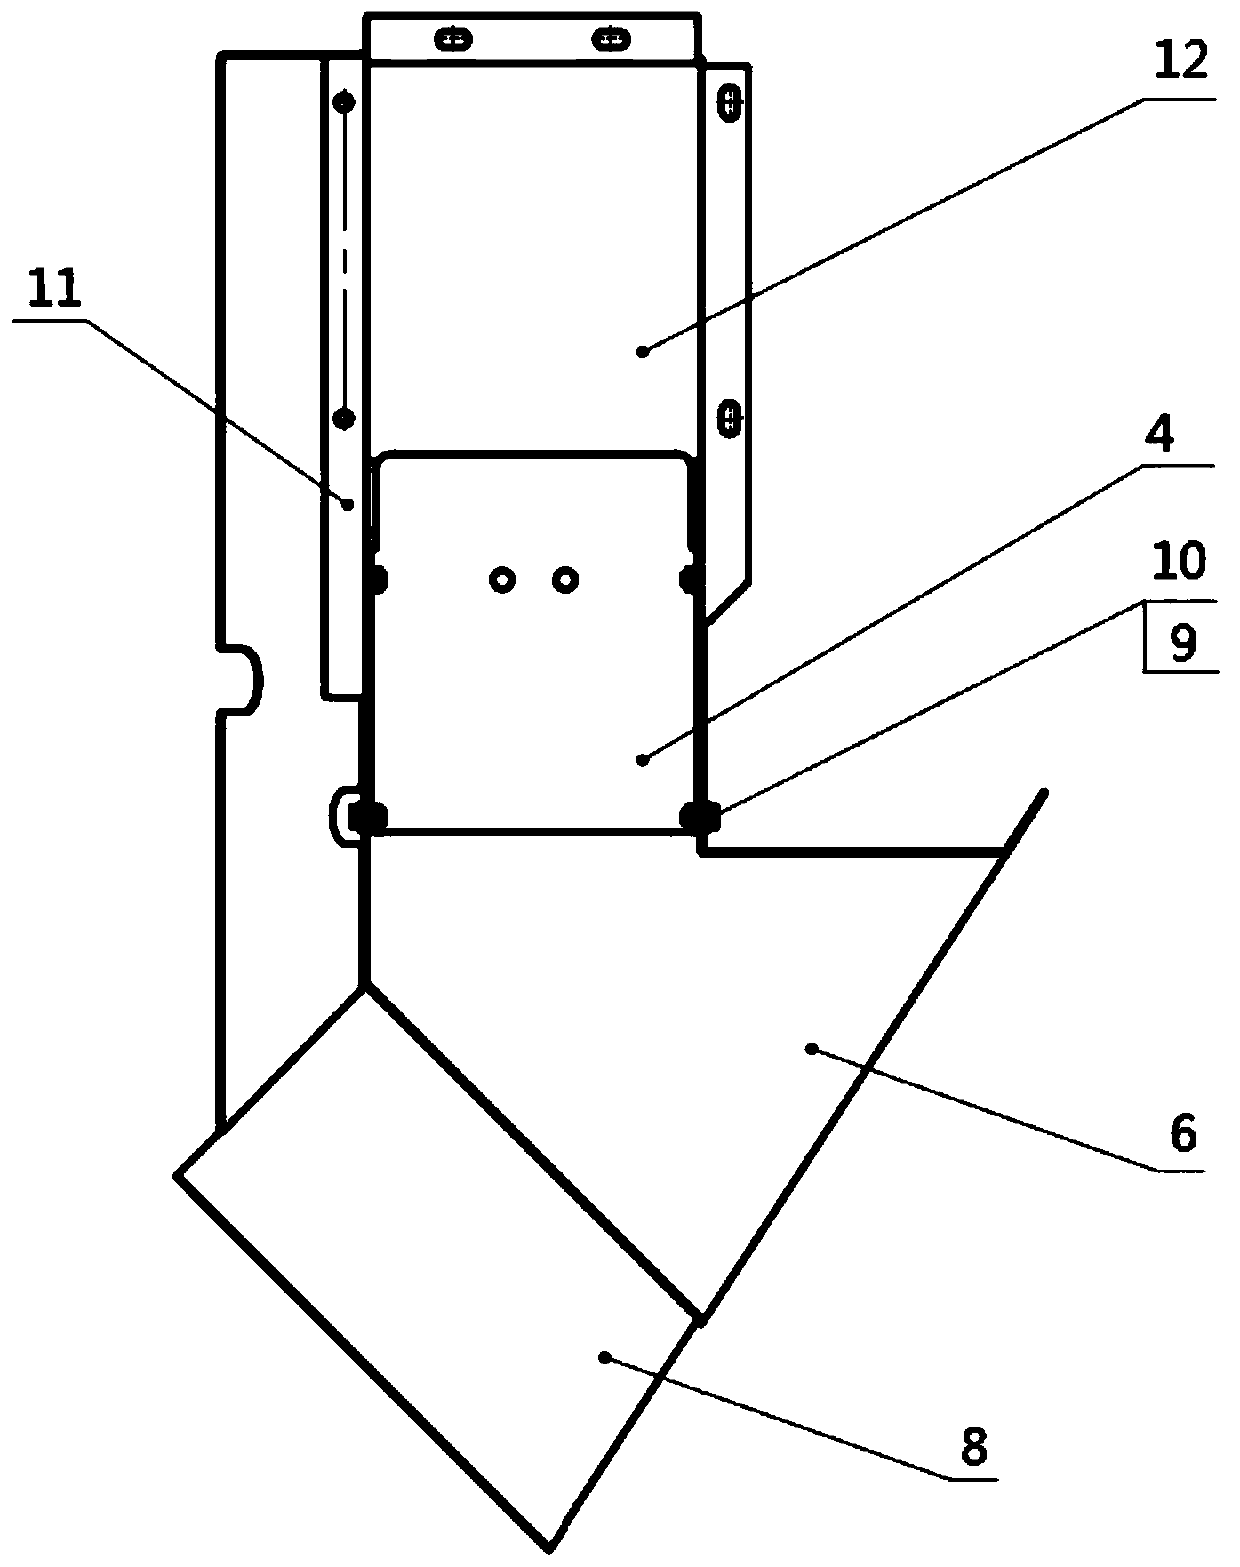 Guiding cover type granary with adjustable material paths